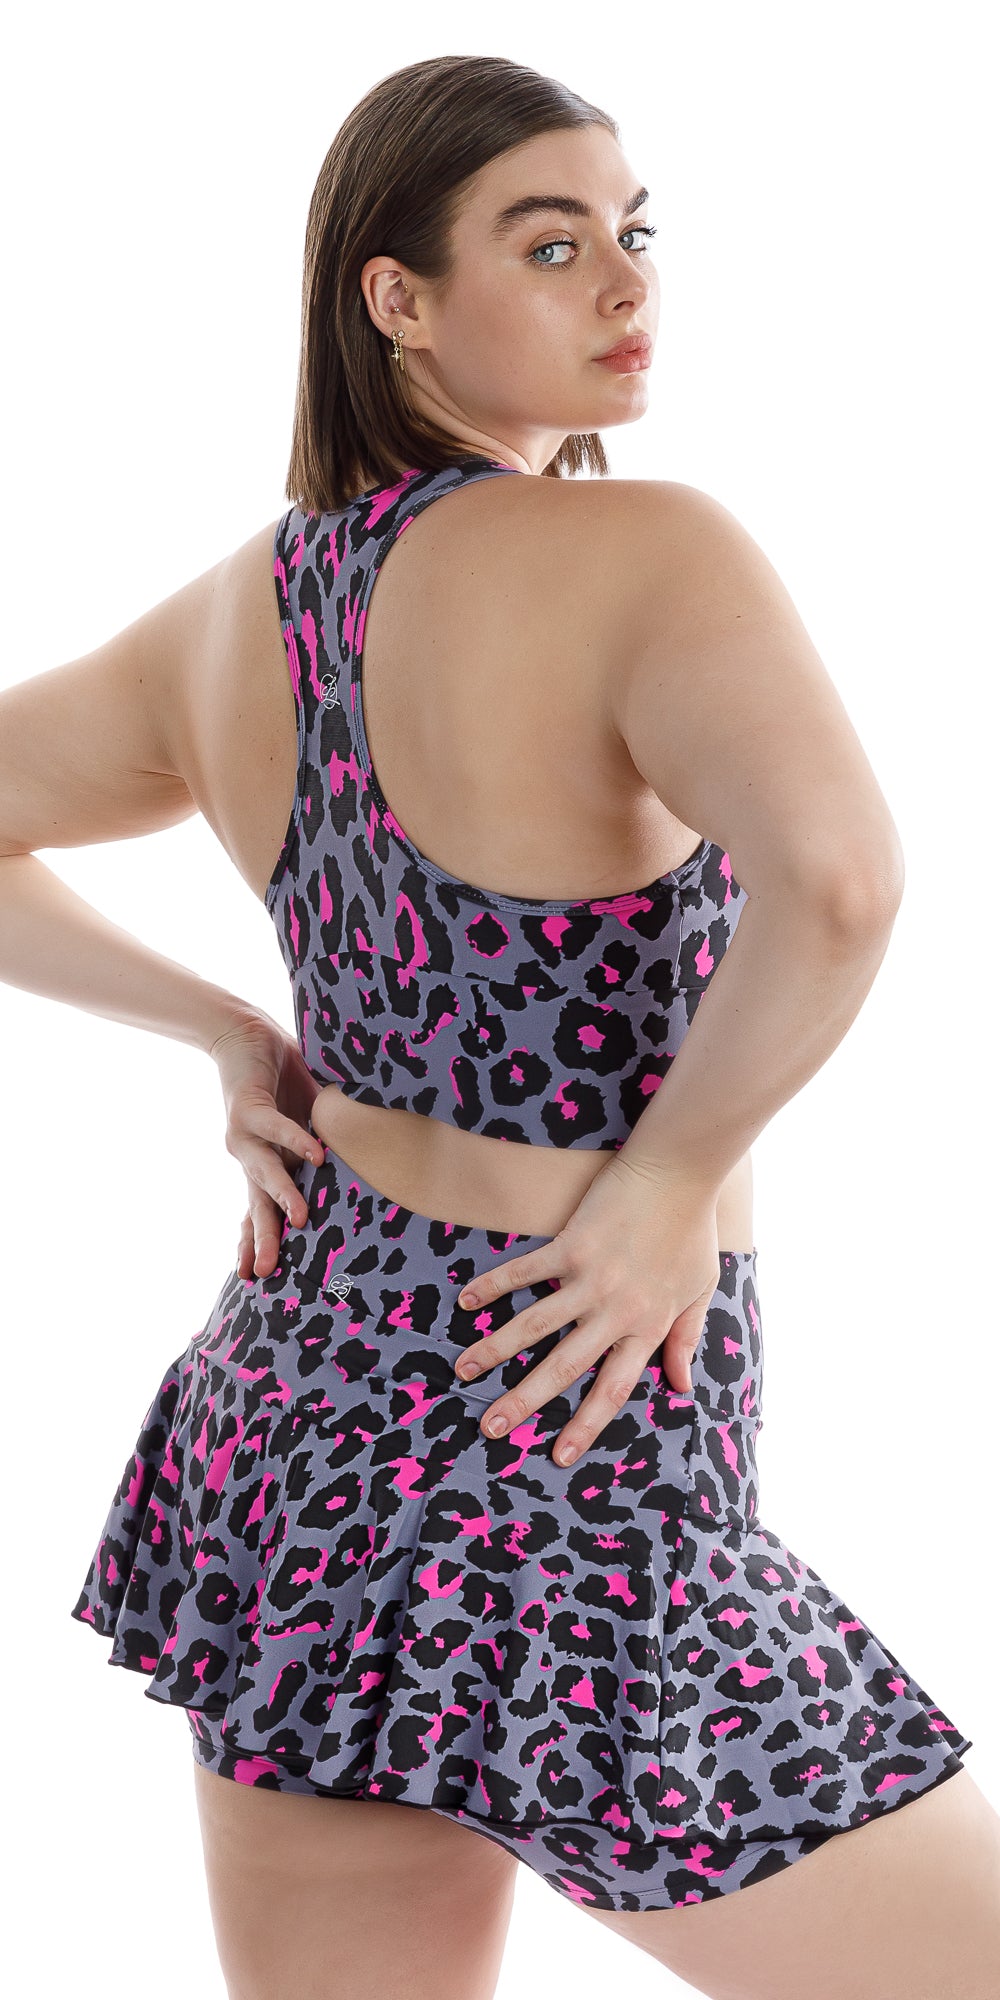 Angled side view of girl in animal print Pink Leopard Eco Racer Back Bra and matching skort looking over her right shoulder and putting both hands on waist